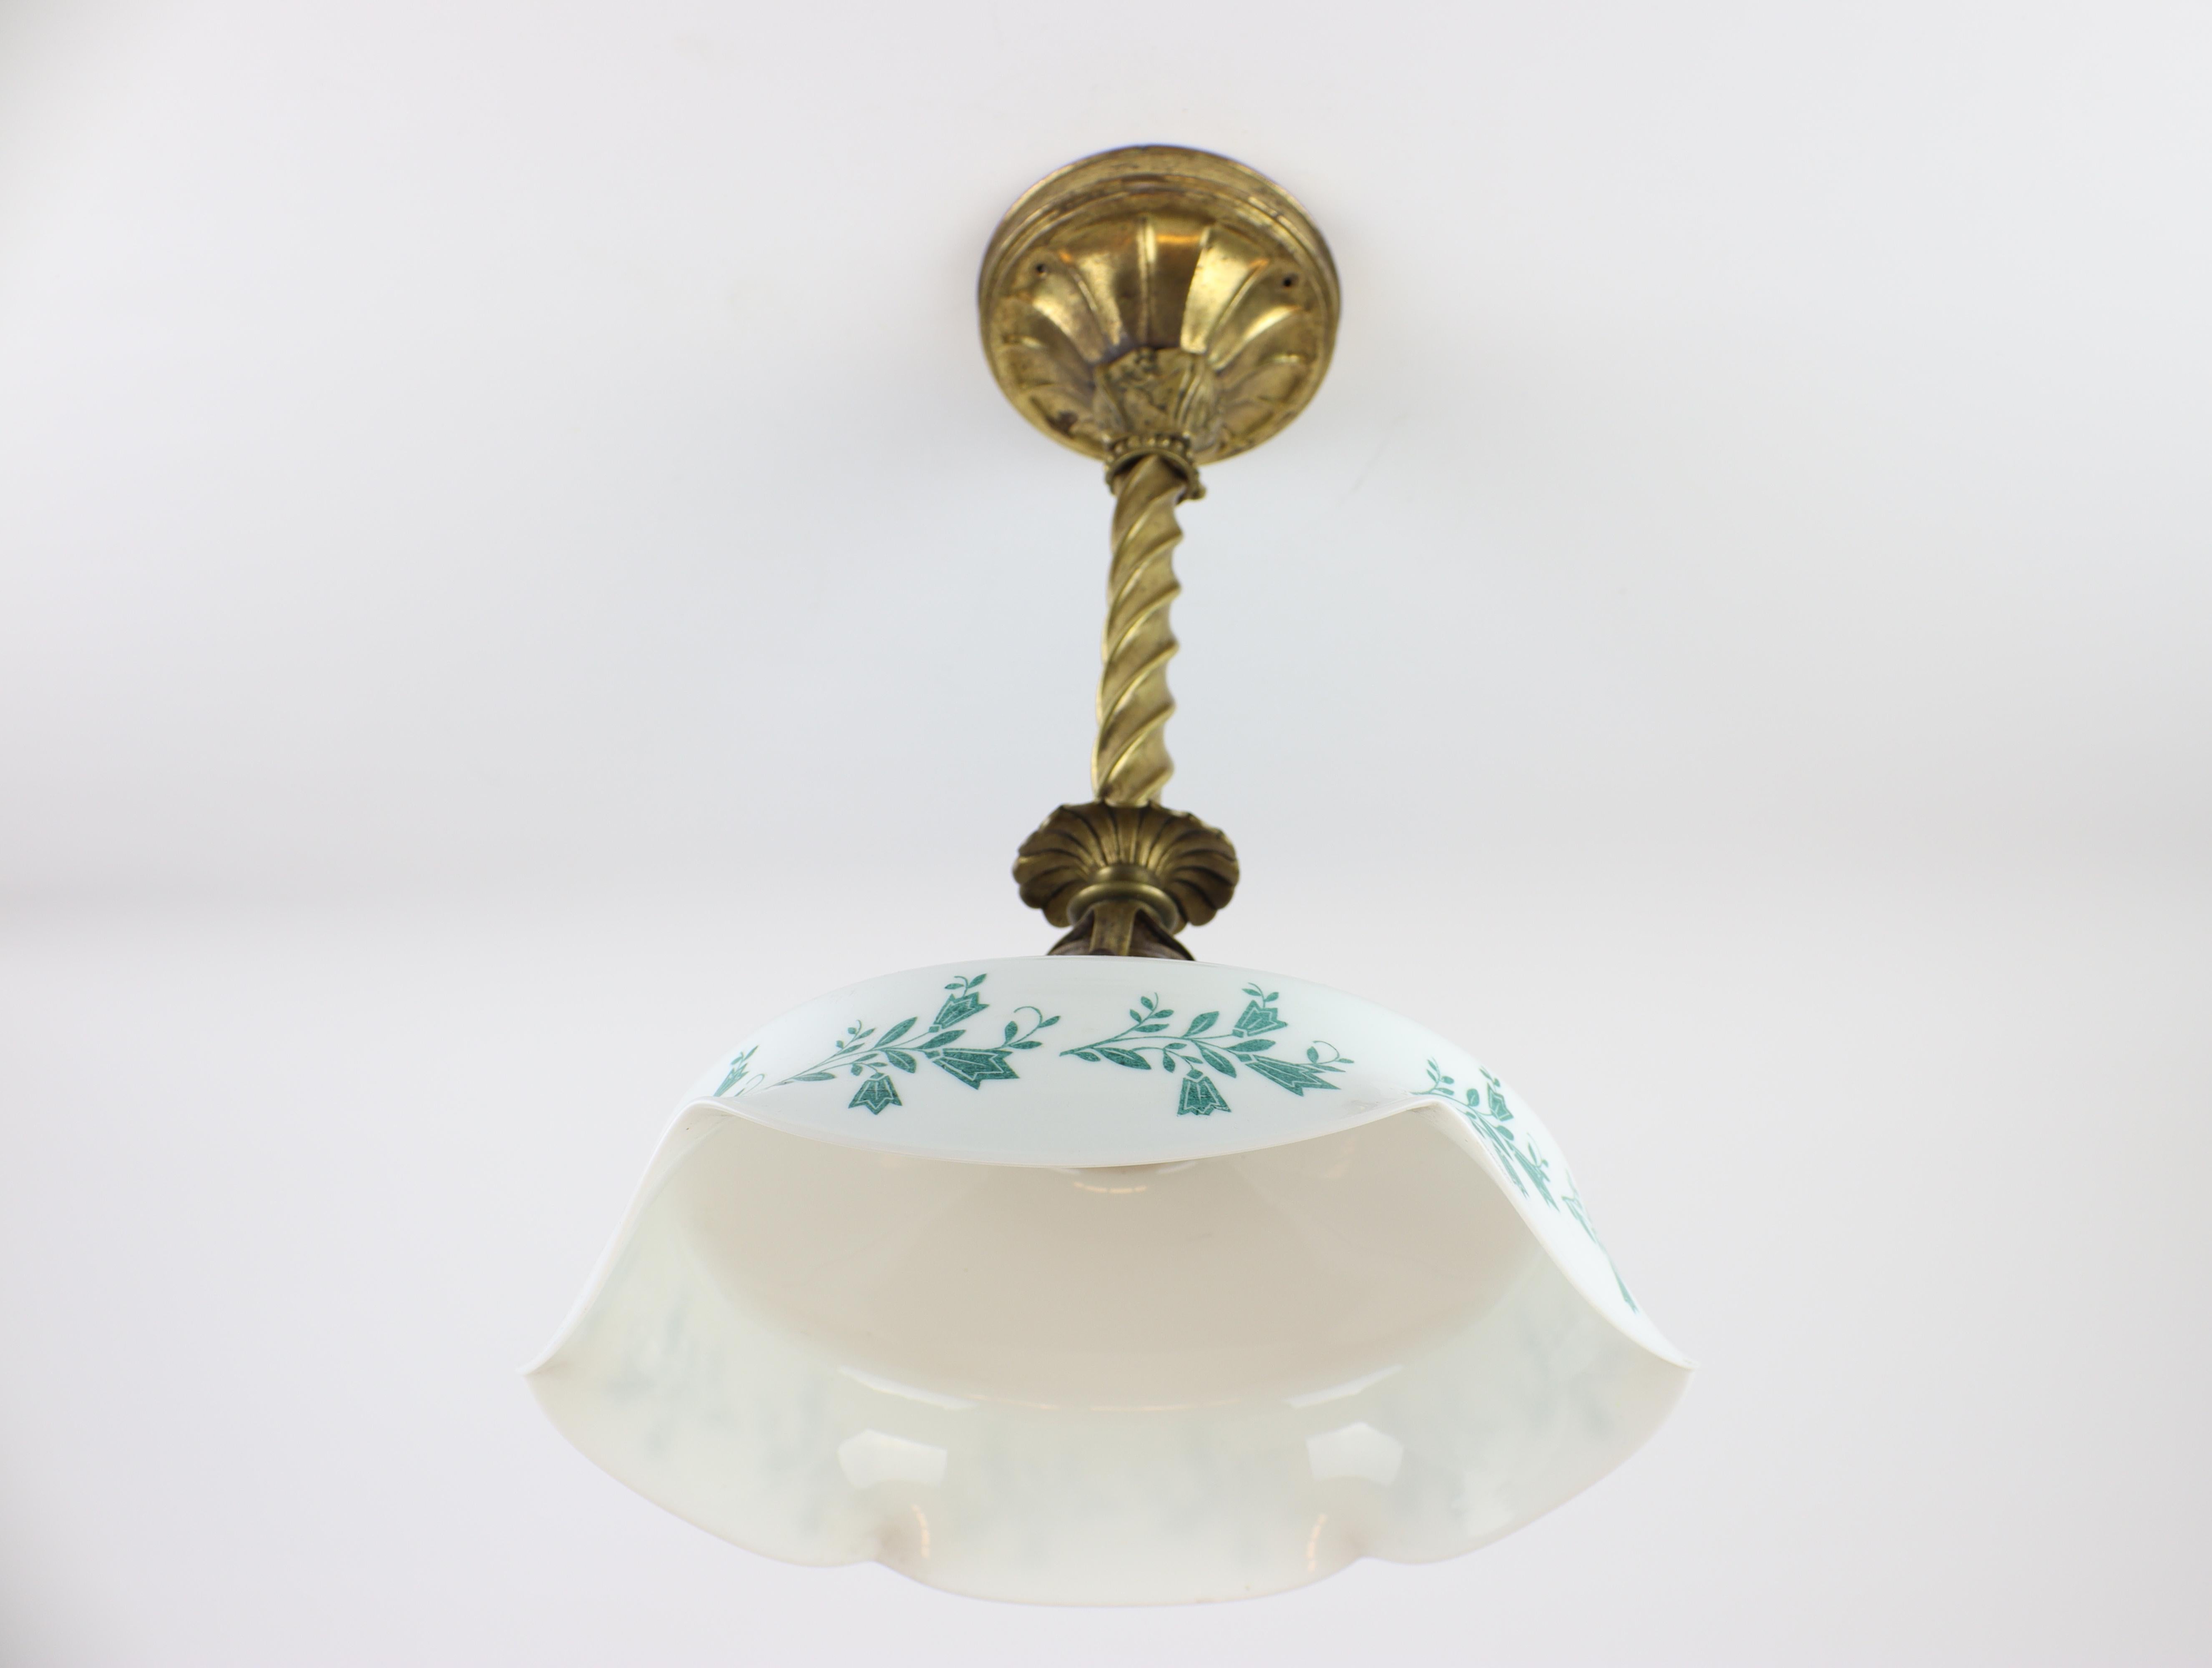 Brass Art Nouveau Ceiling Lamp with Decorative Holder For Sale